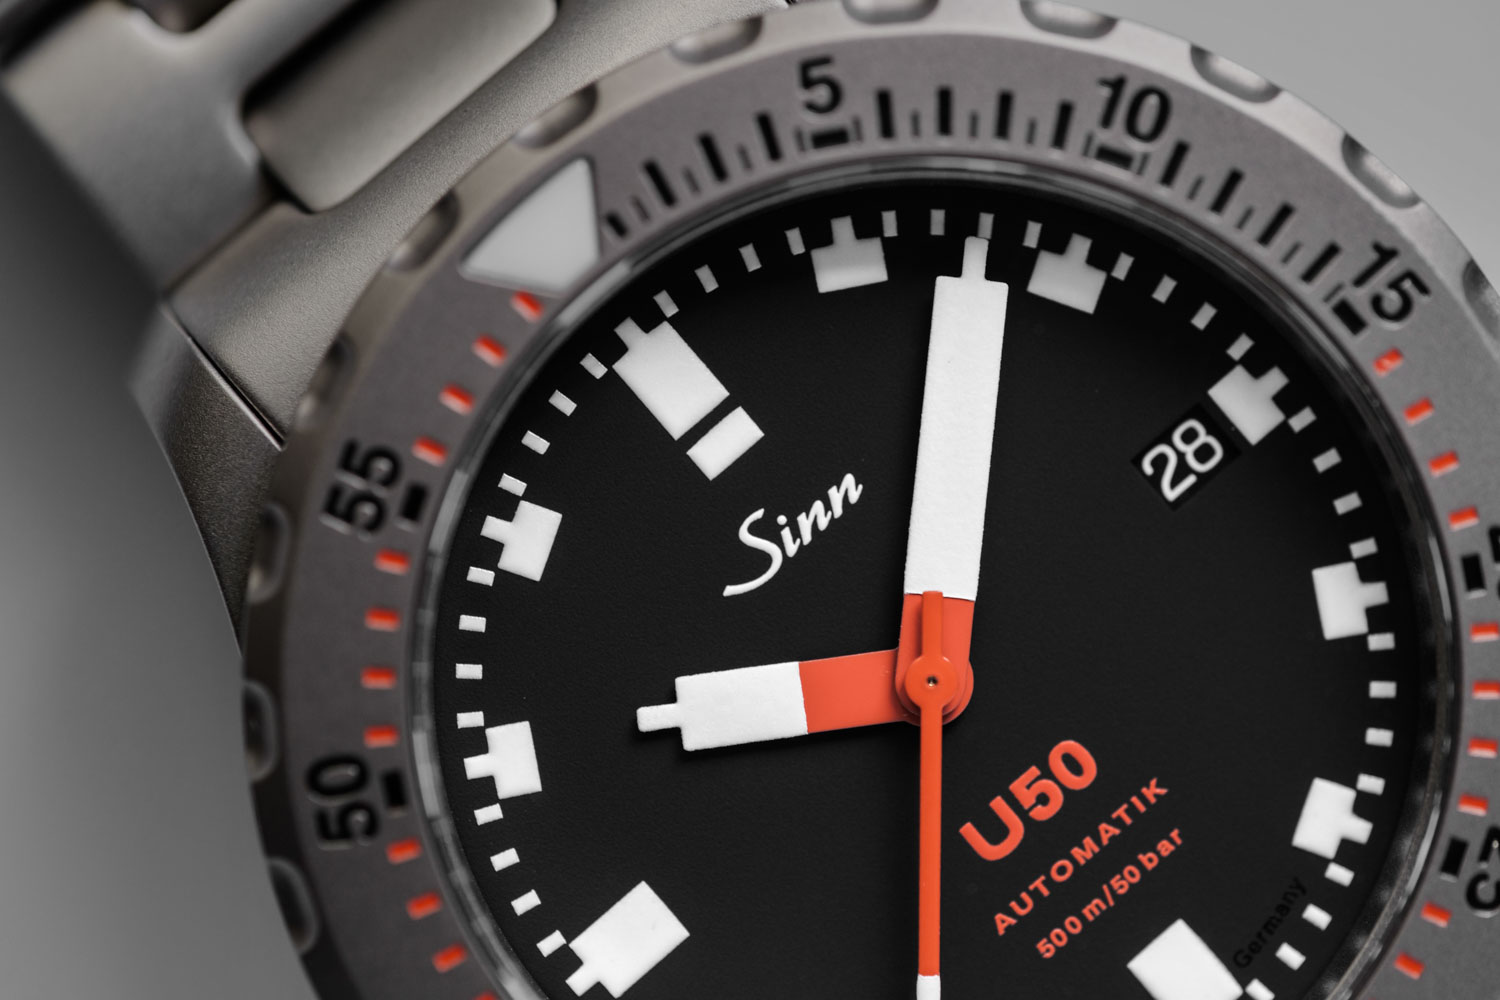 The TEGIMENT treated bezel of the SINN U50 features deep engravings for large legible markings on the dive scale of the watch (©Revolution)